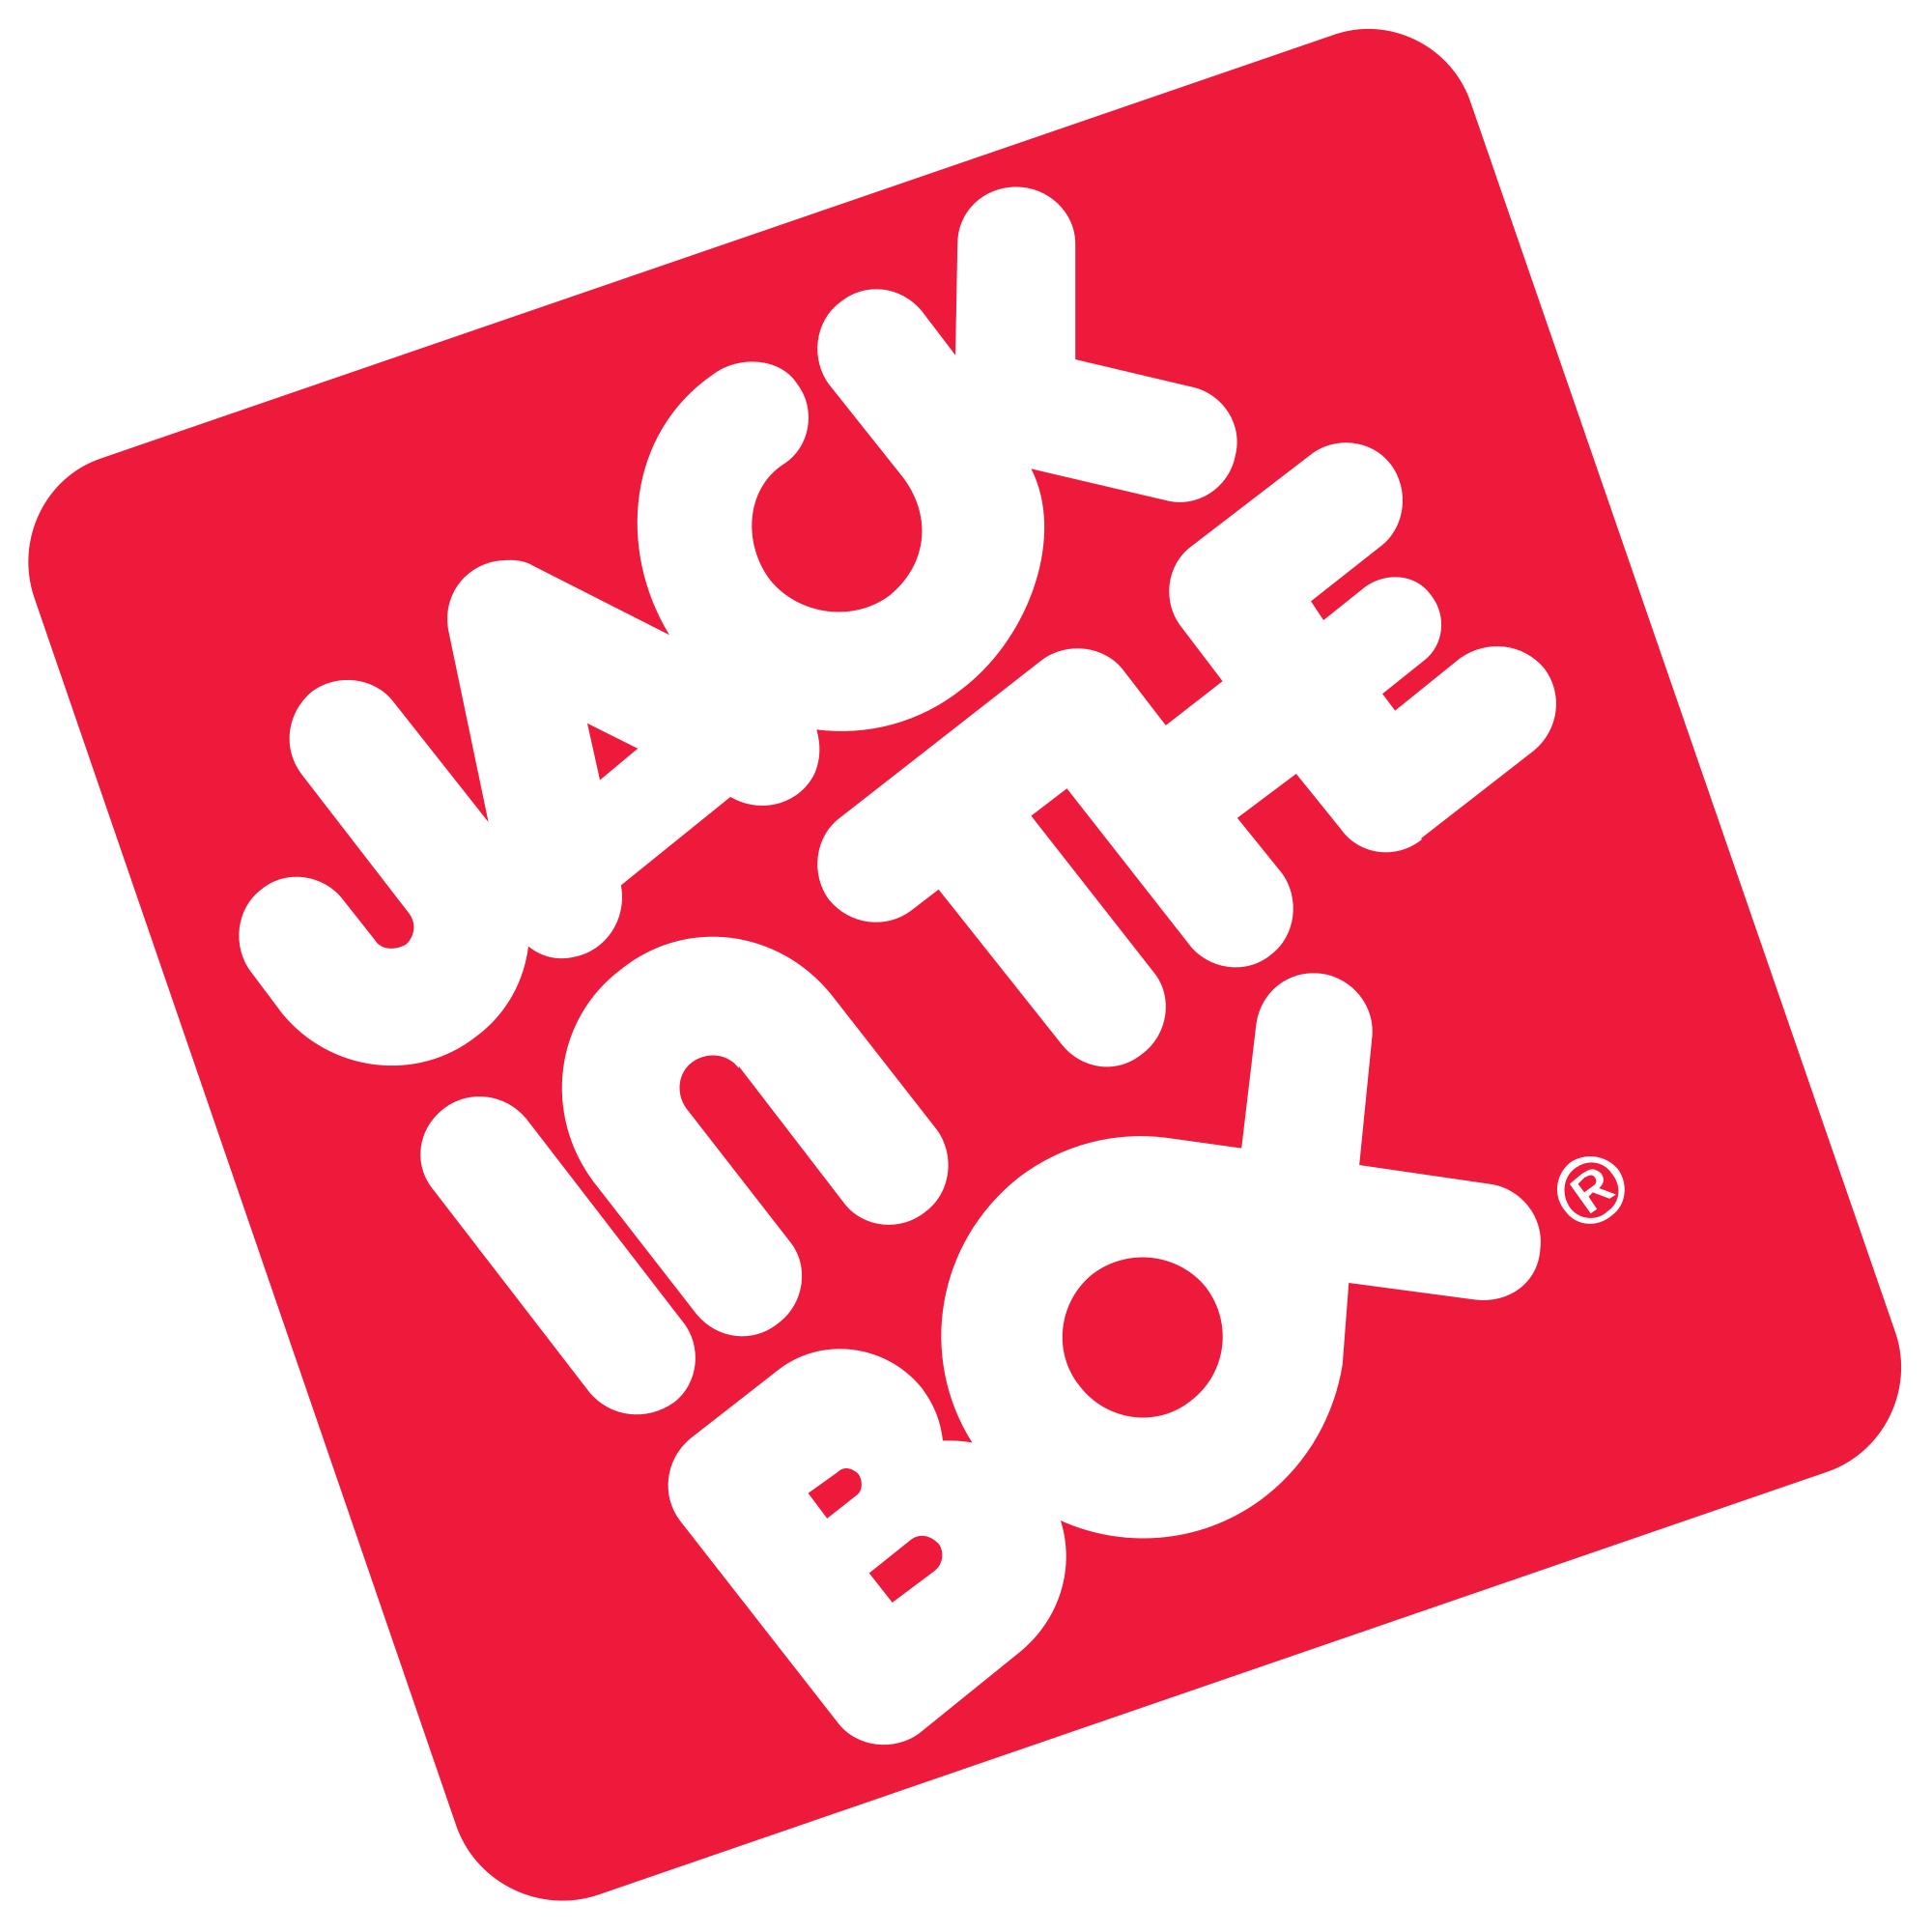 jack in box apple pay